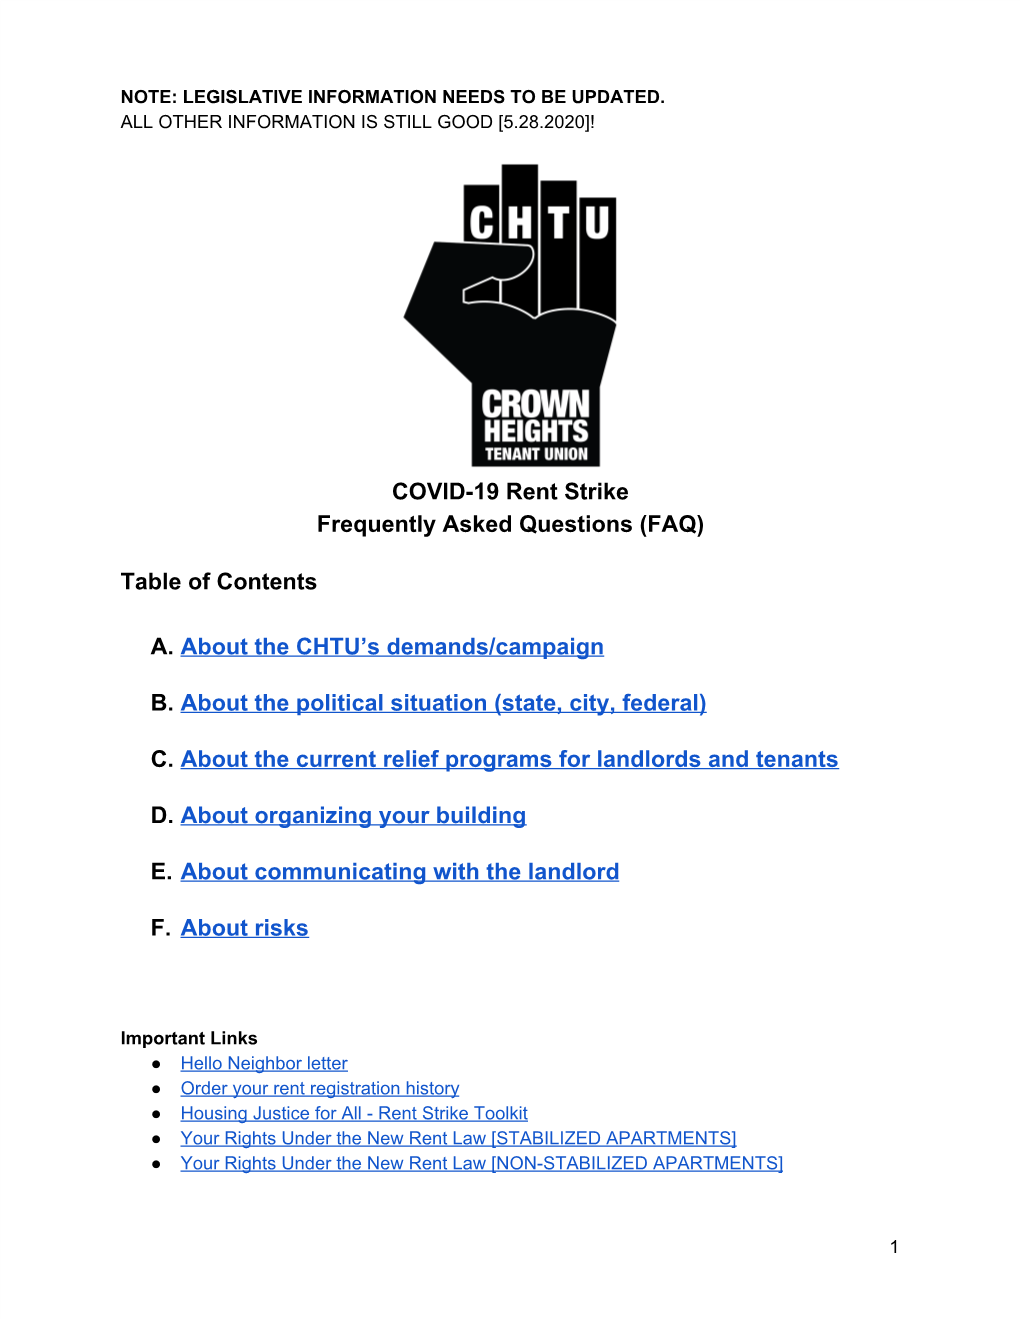 COVID-19 Rent Strike Frequently Asked Questions (FAQ) Table Of